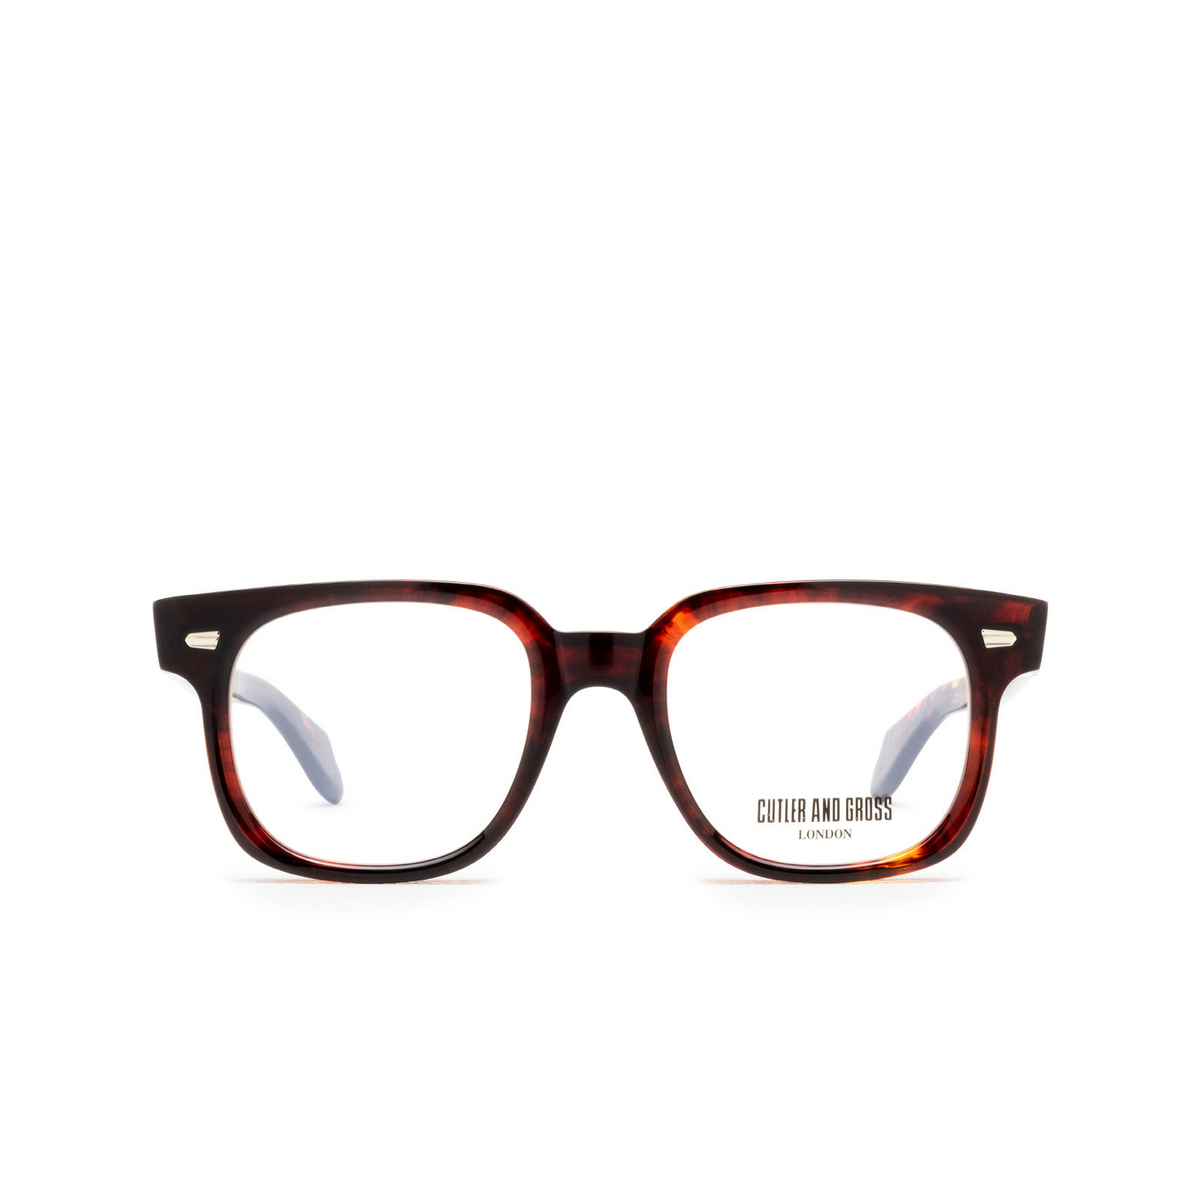 Cutler and Gross 1399 Eyeglasses 02 Red Havana - front view